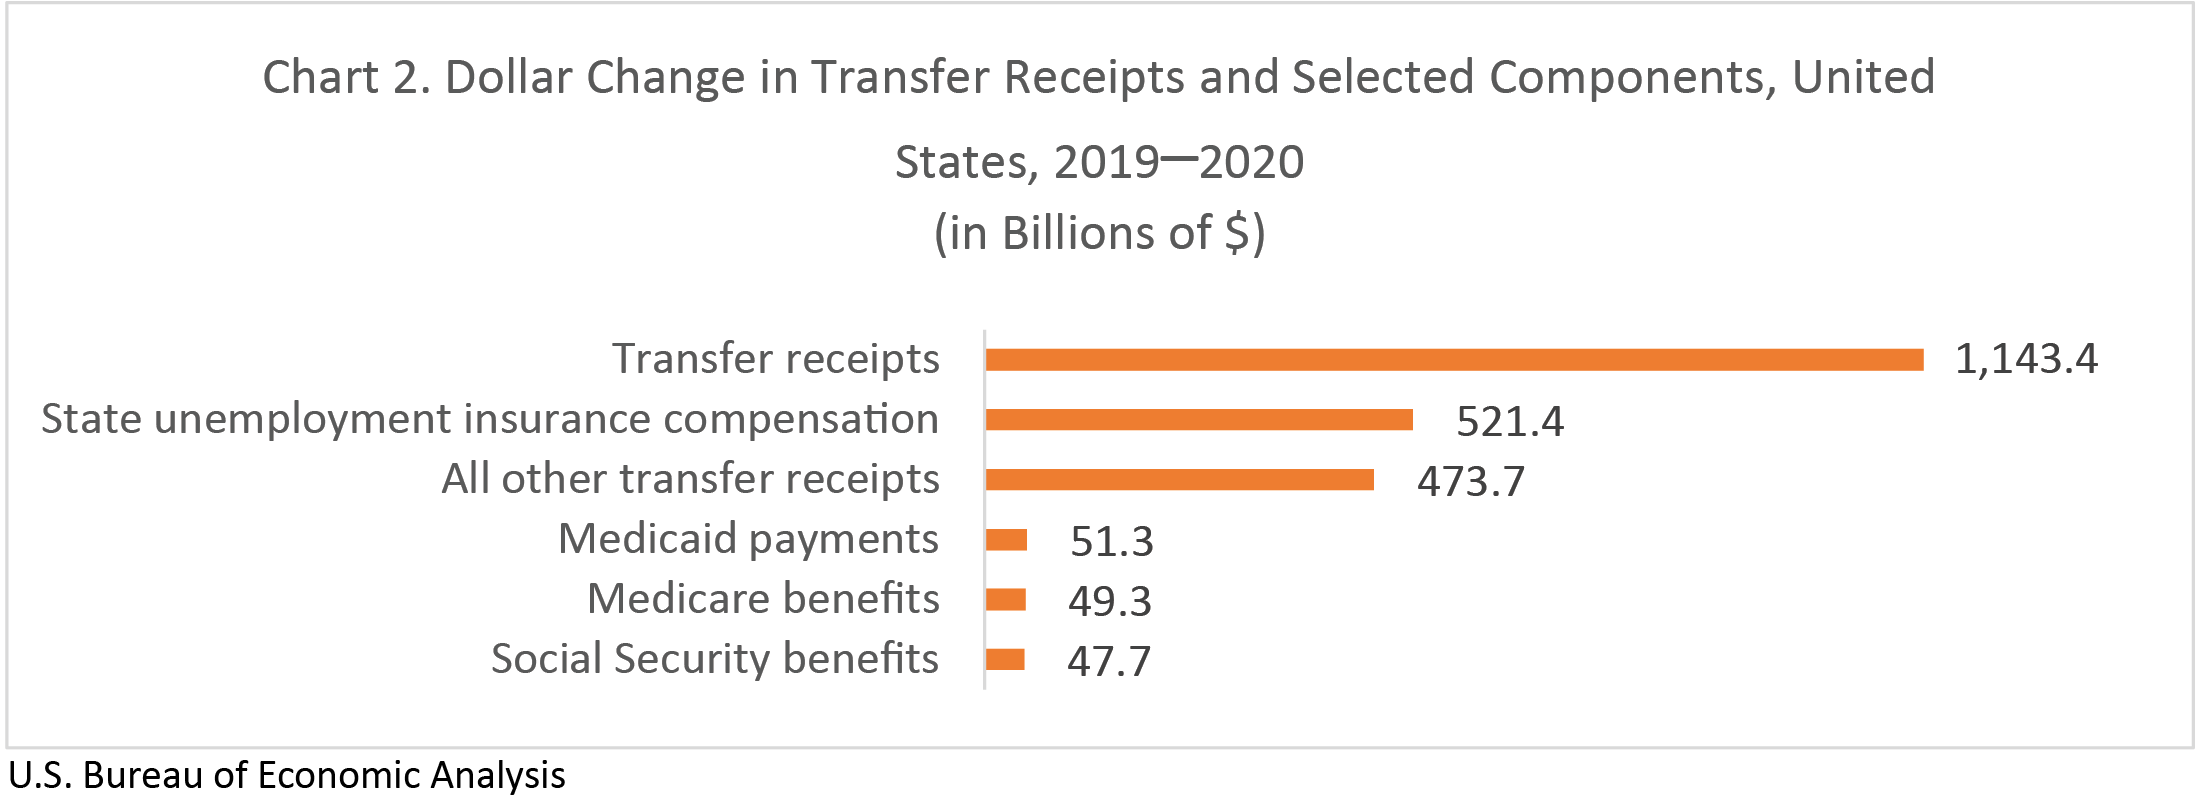 Chart2. Dollar Change in Transfer Receipts and Selected Components, US, 2019-2020